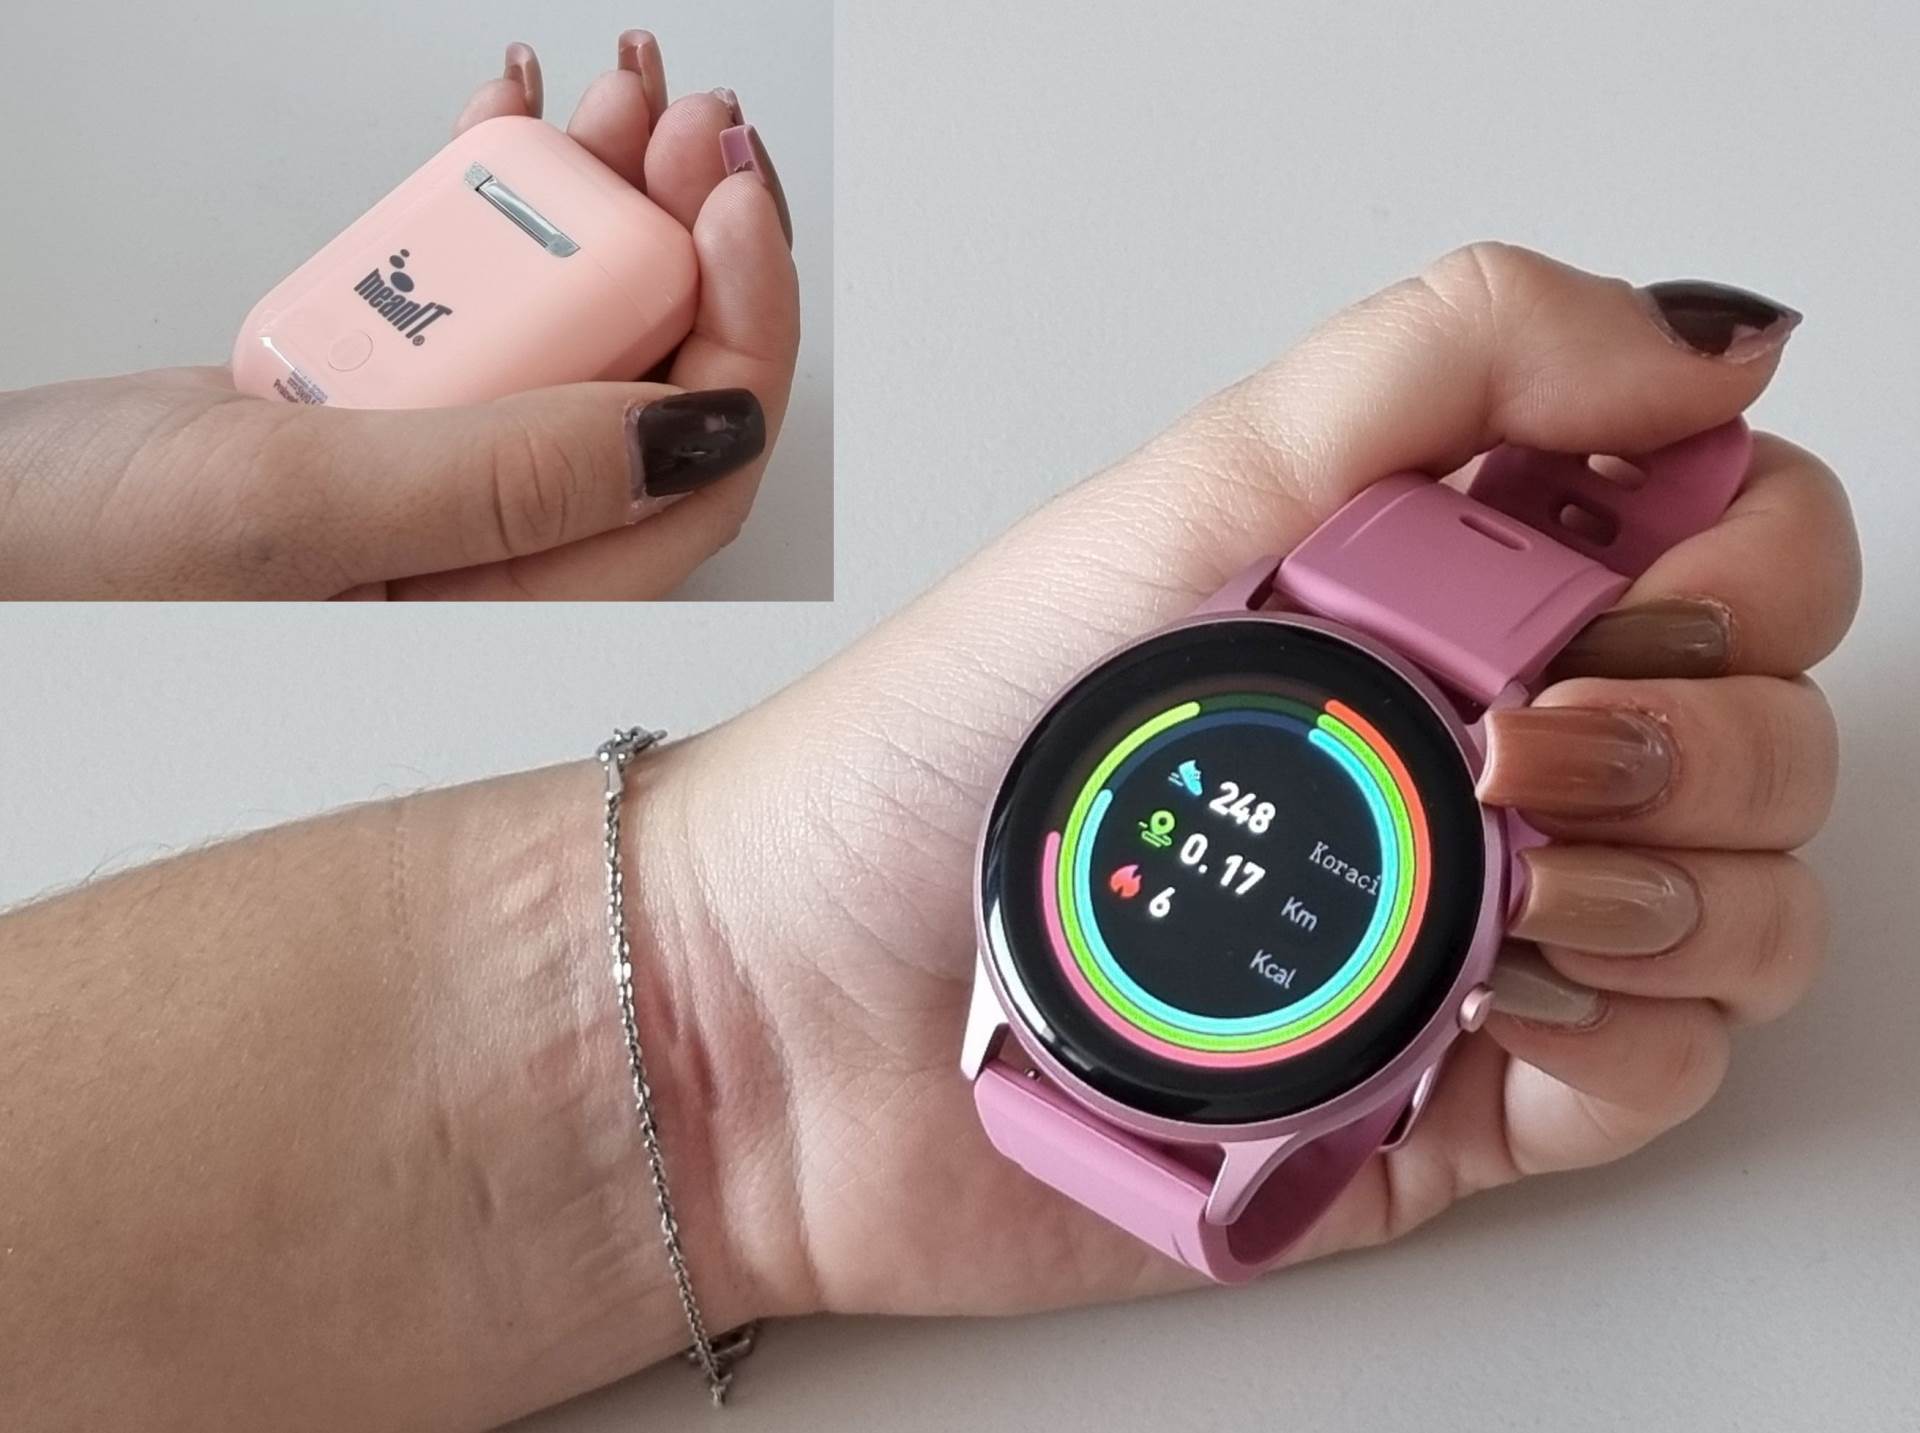  meanIT Smartwatch M33 Lady & meanIT TWS B200 pink.jpg 